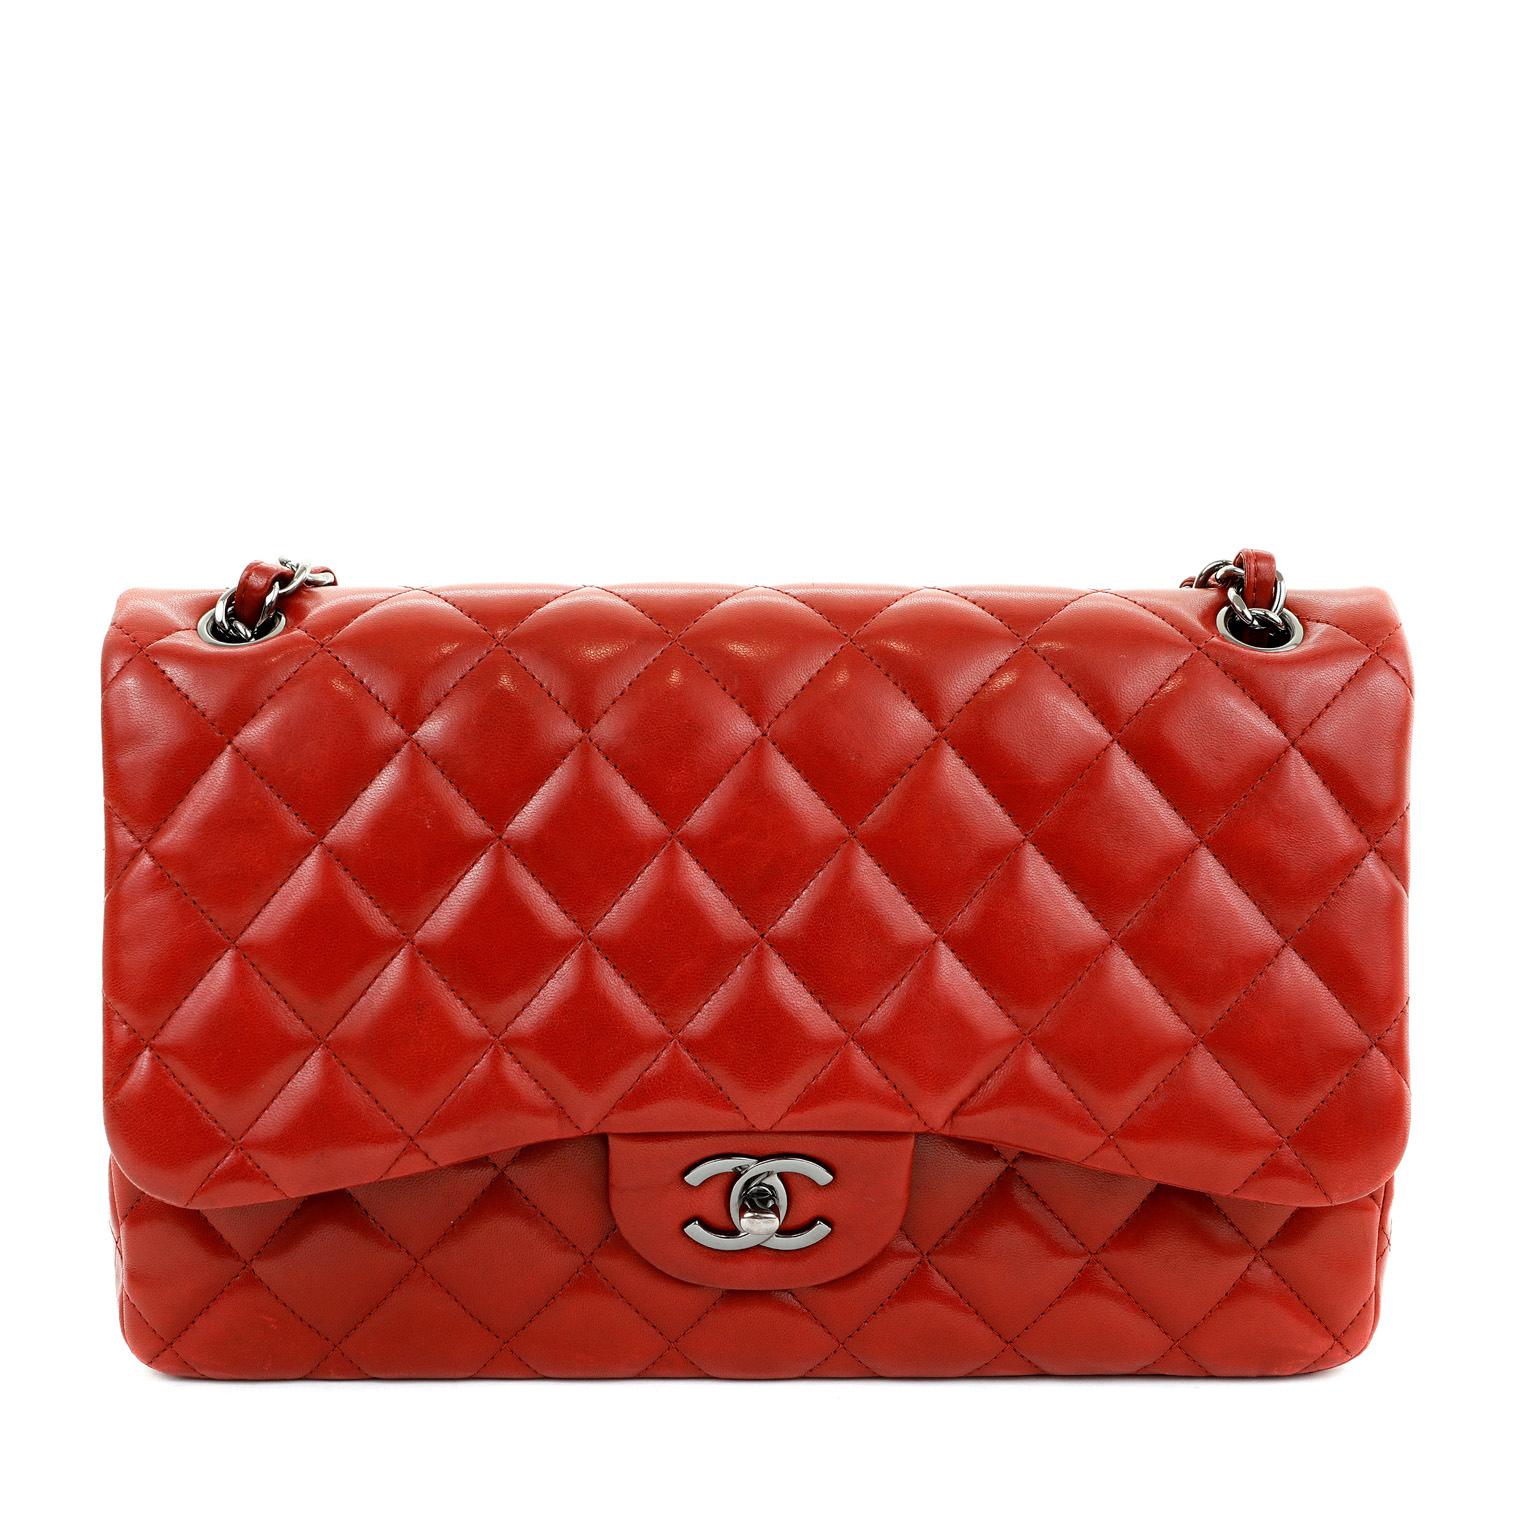 This authentic Chanel Lipstick Red Lambskin Jumbo Classic Flap is in pristine condition. A truly timeless piece, the Jumbo Classic is certain to hold its value.

Glamorous lipstick red lambskin is quilted in signature Chanel diamond pattern.  Dark